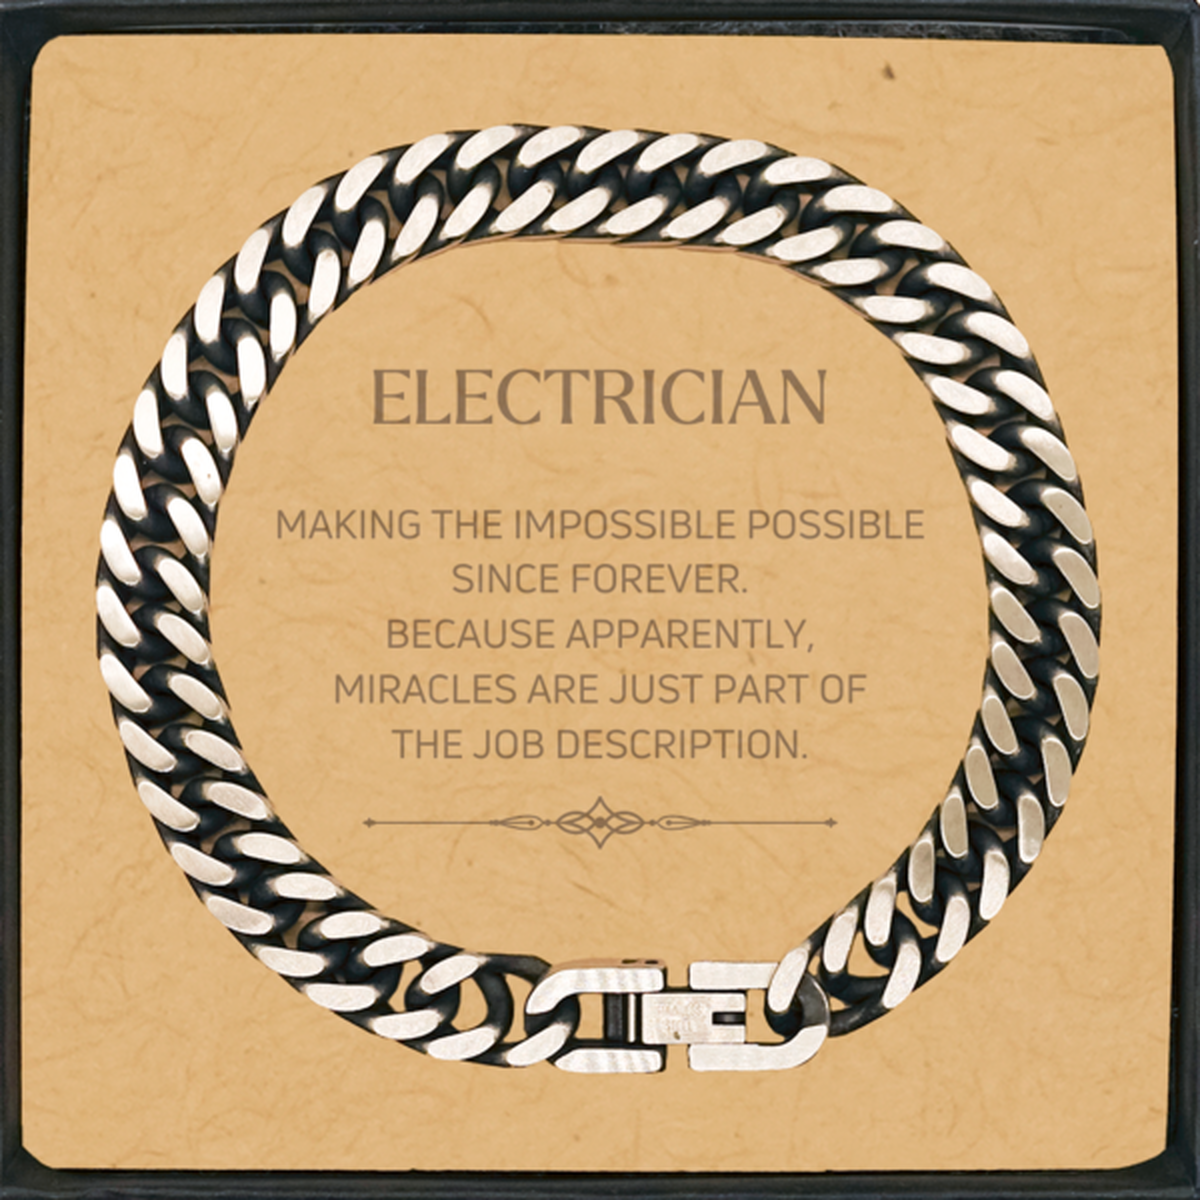 Funny Electrician Gifts, Miracles are just part of the job description, Inspirational Birthday Cuban Link Chain Bracelet For Electrician, Men, Women, Coworkers, Friends, Boss